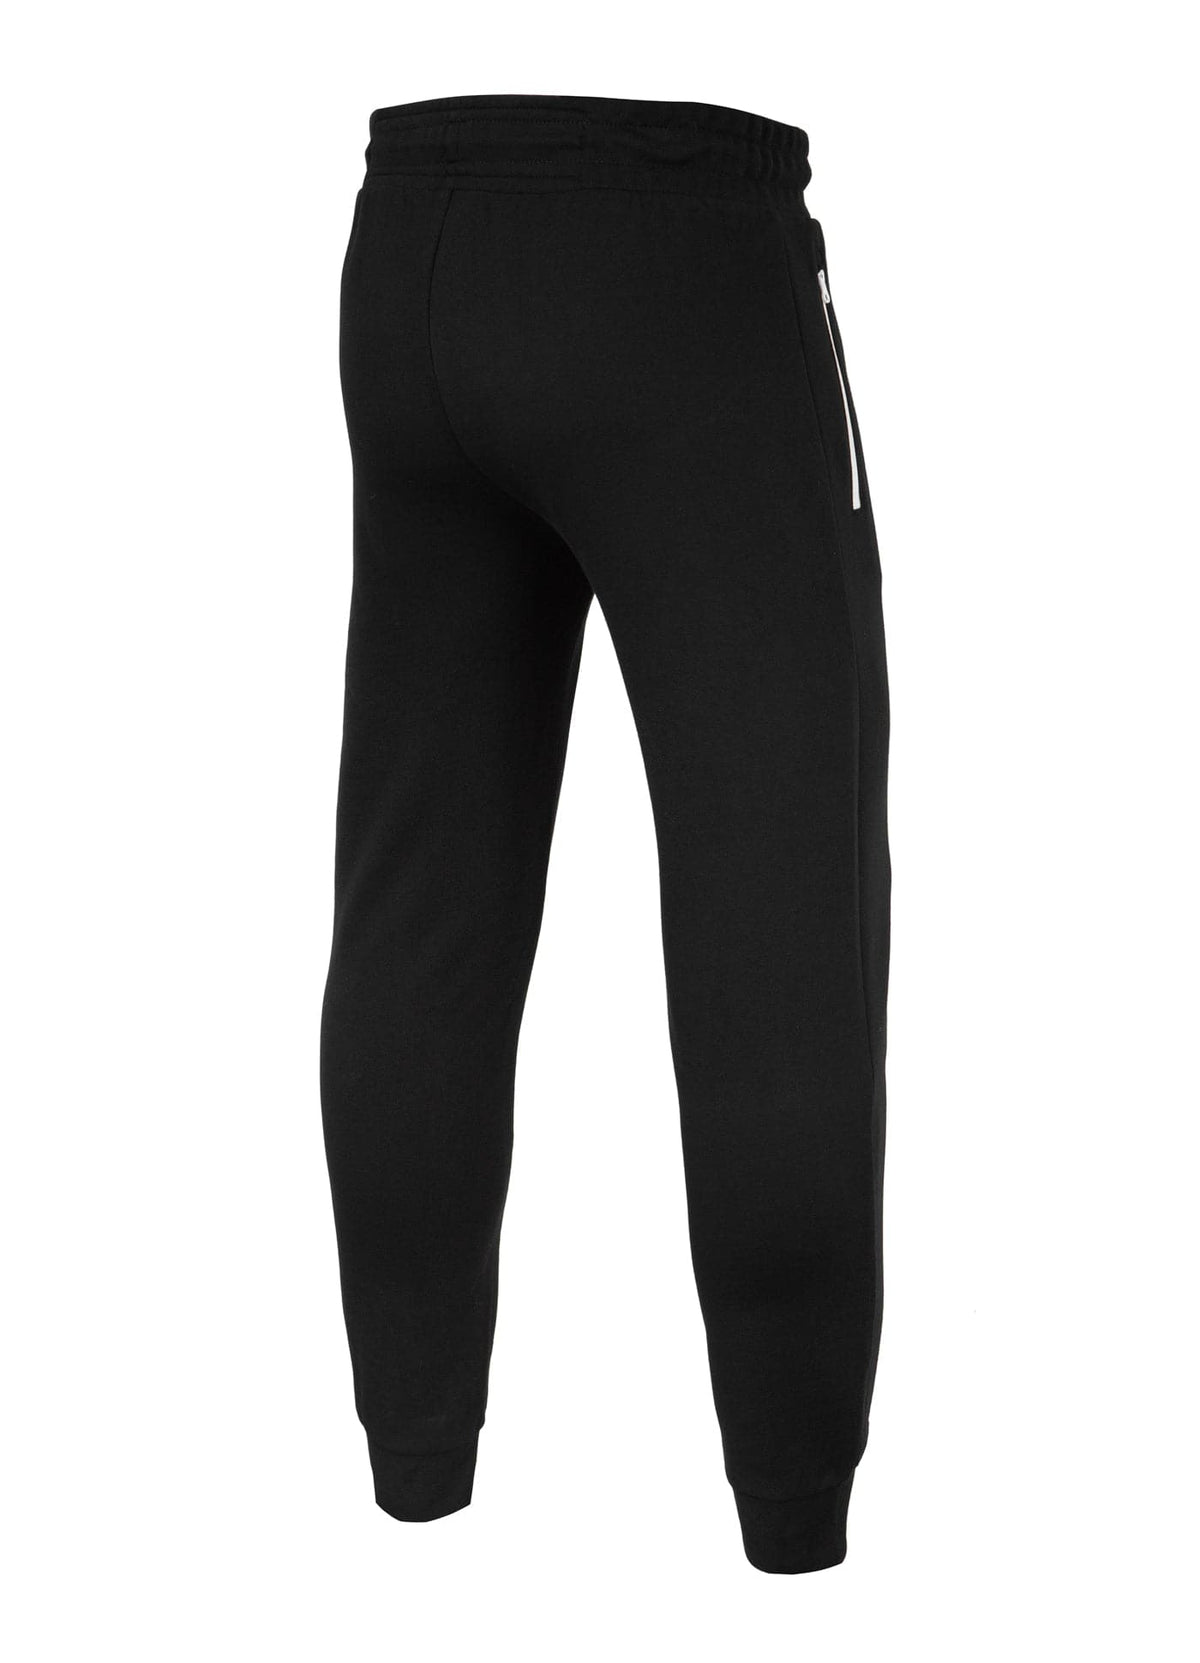 JARVIS Tricot Terry Black Jogging Pants